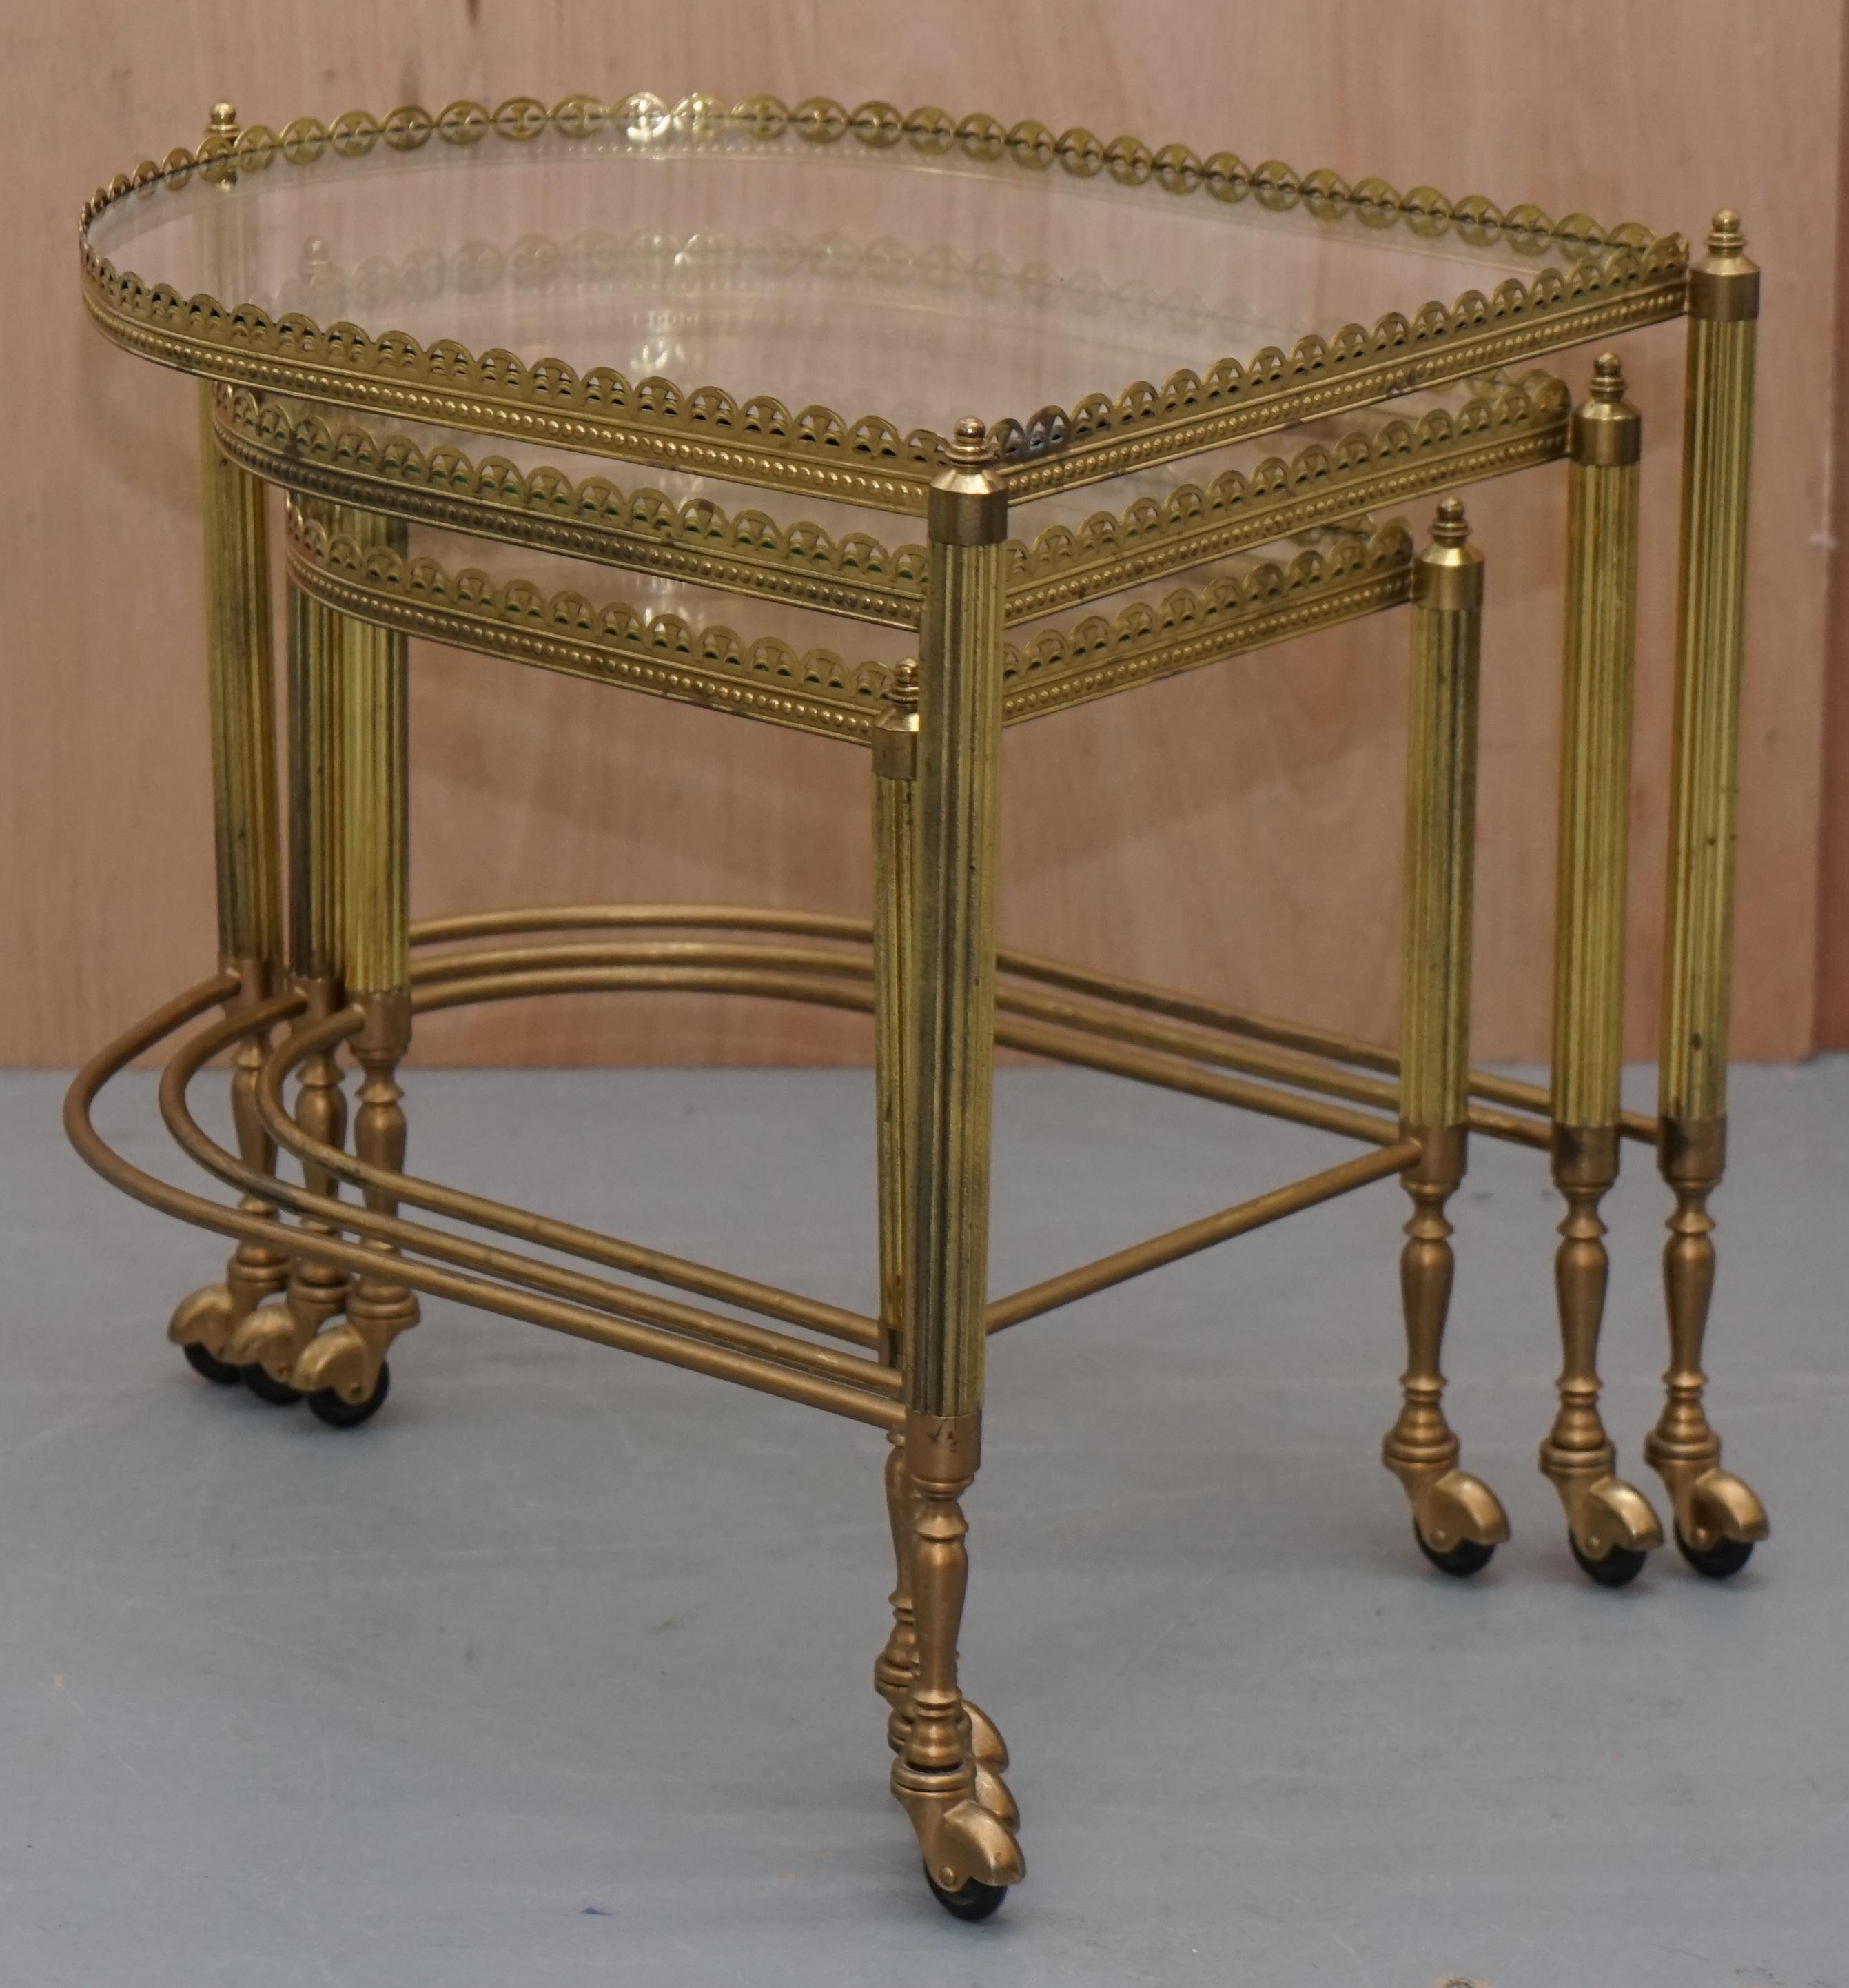 We are delighted to offer for sale this stunning set of three original mid century modern Maison Bagues trolley nested tables

A very good looking highly decorative and collectable nest of tables, each one is the style of a drinks, silver or tea